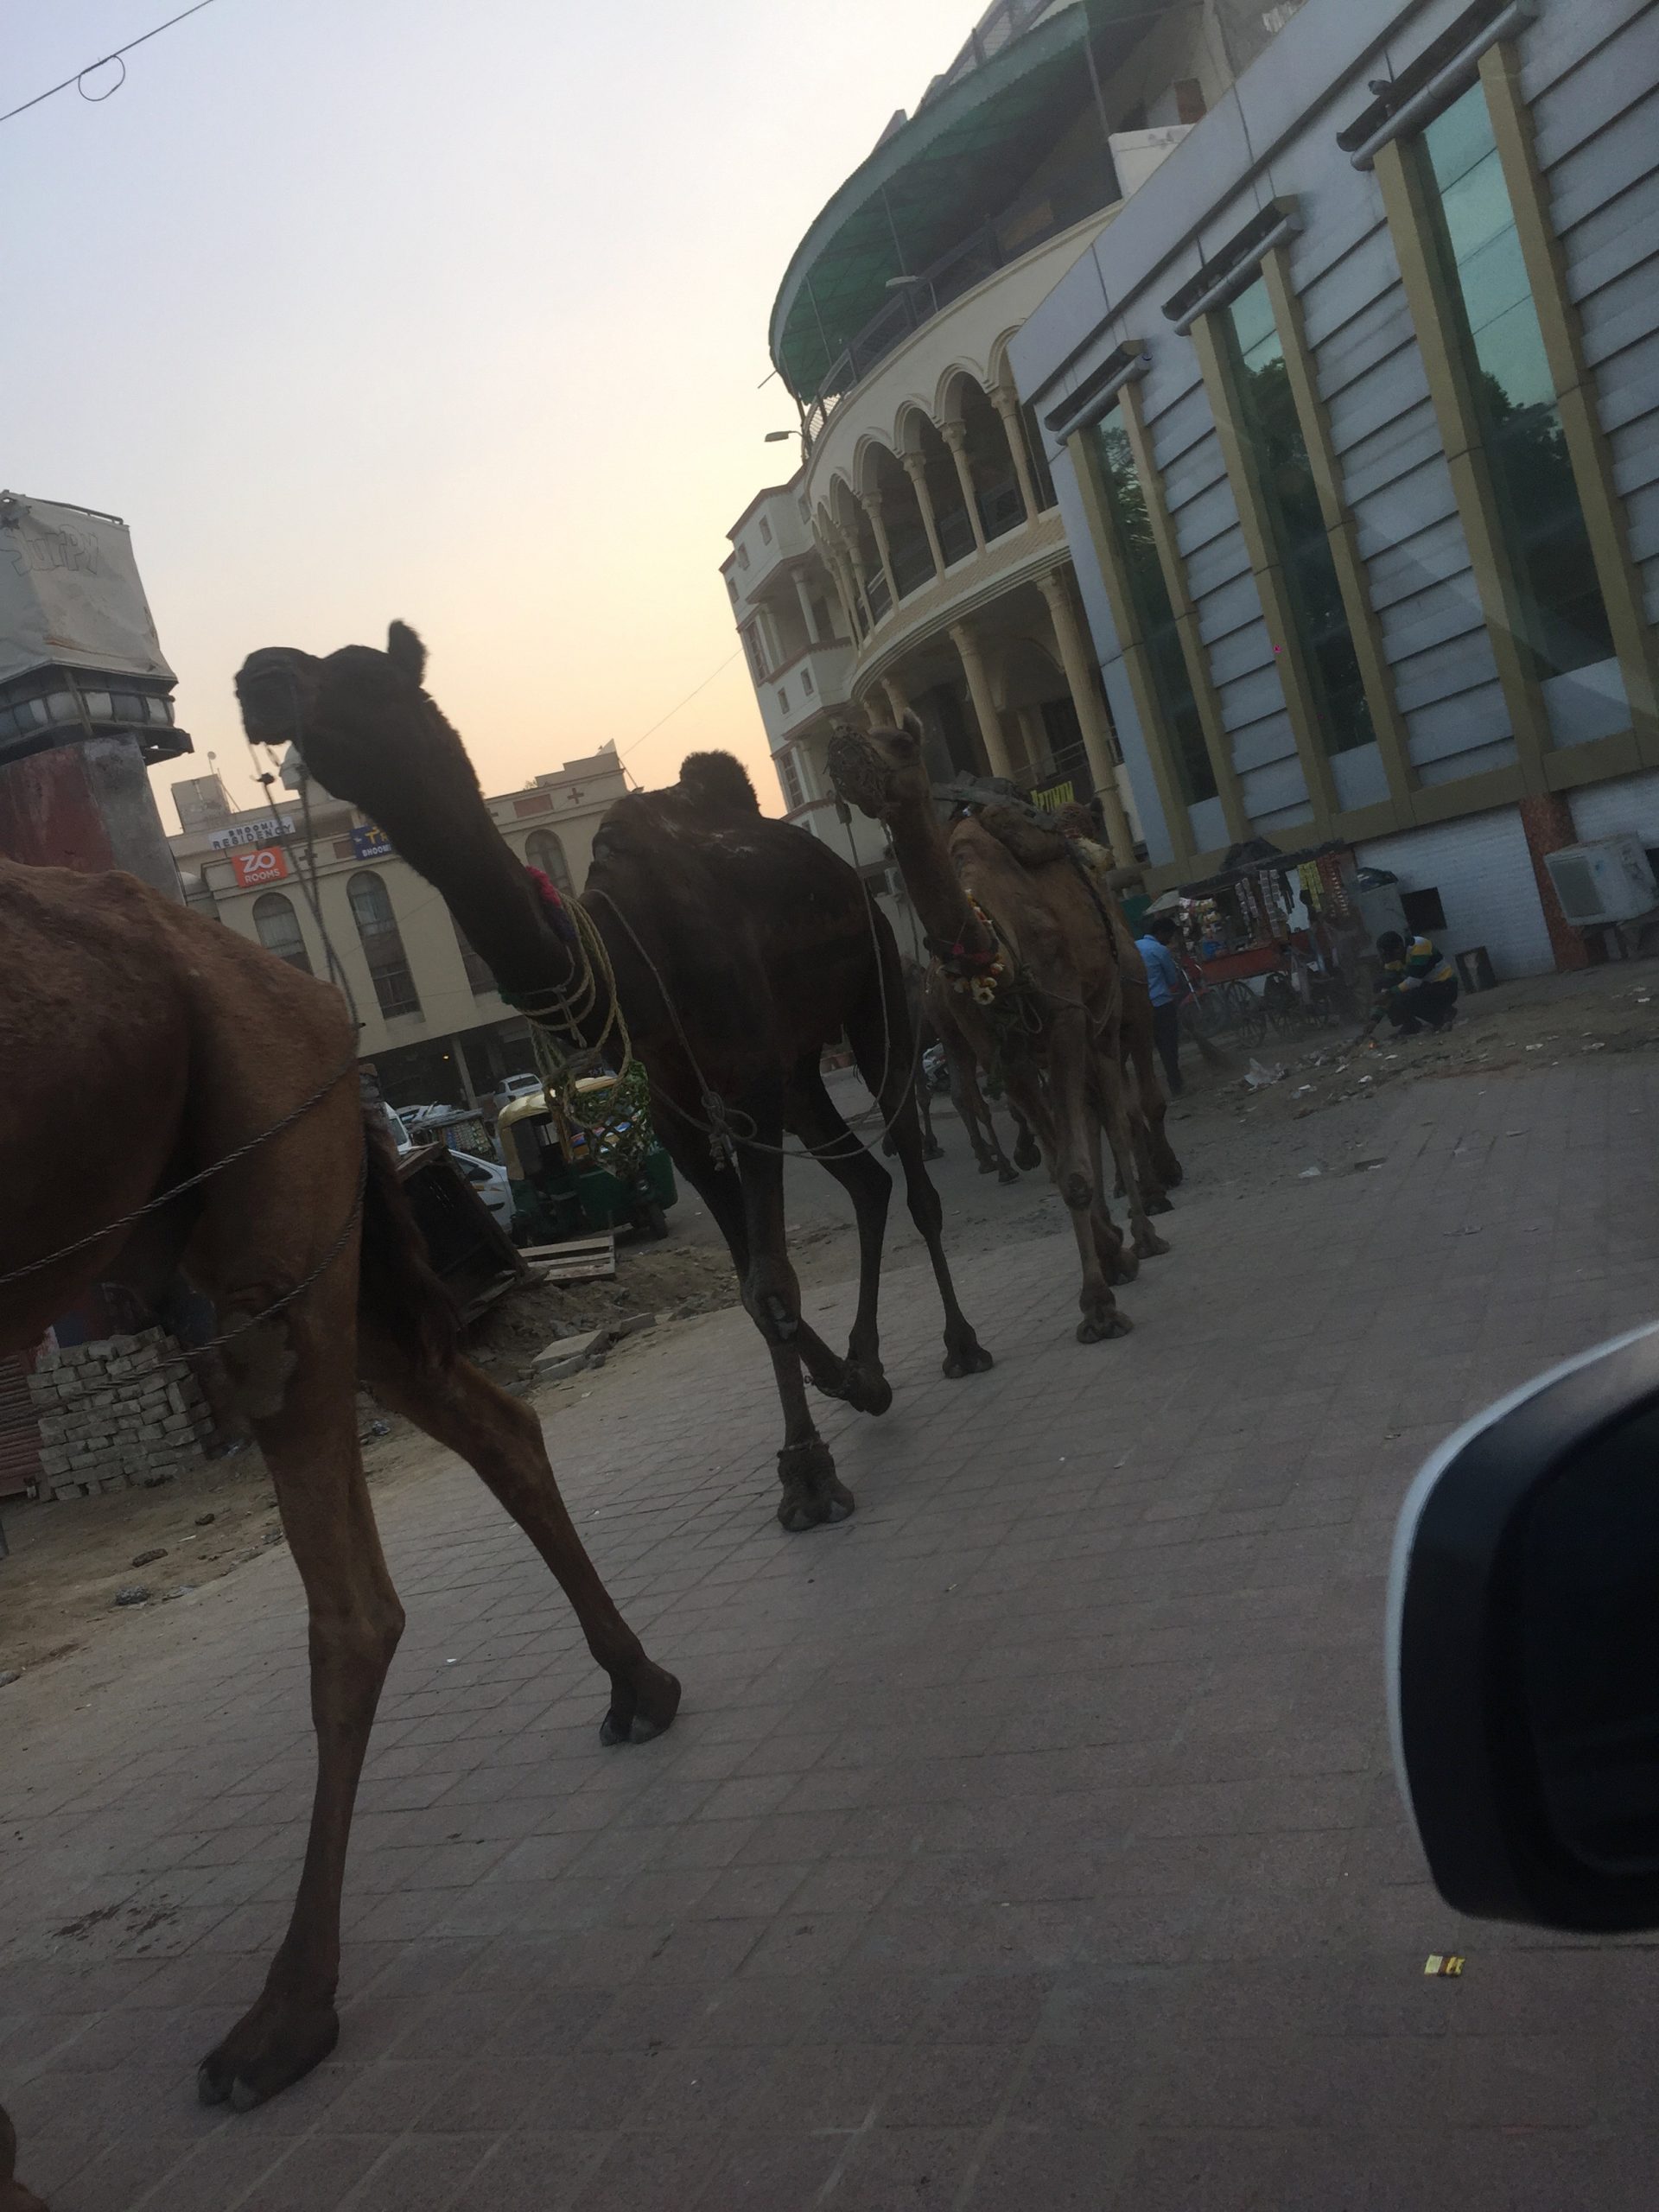 Camels in India. All alone at the Taj Mahal